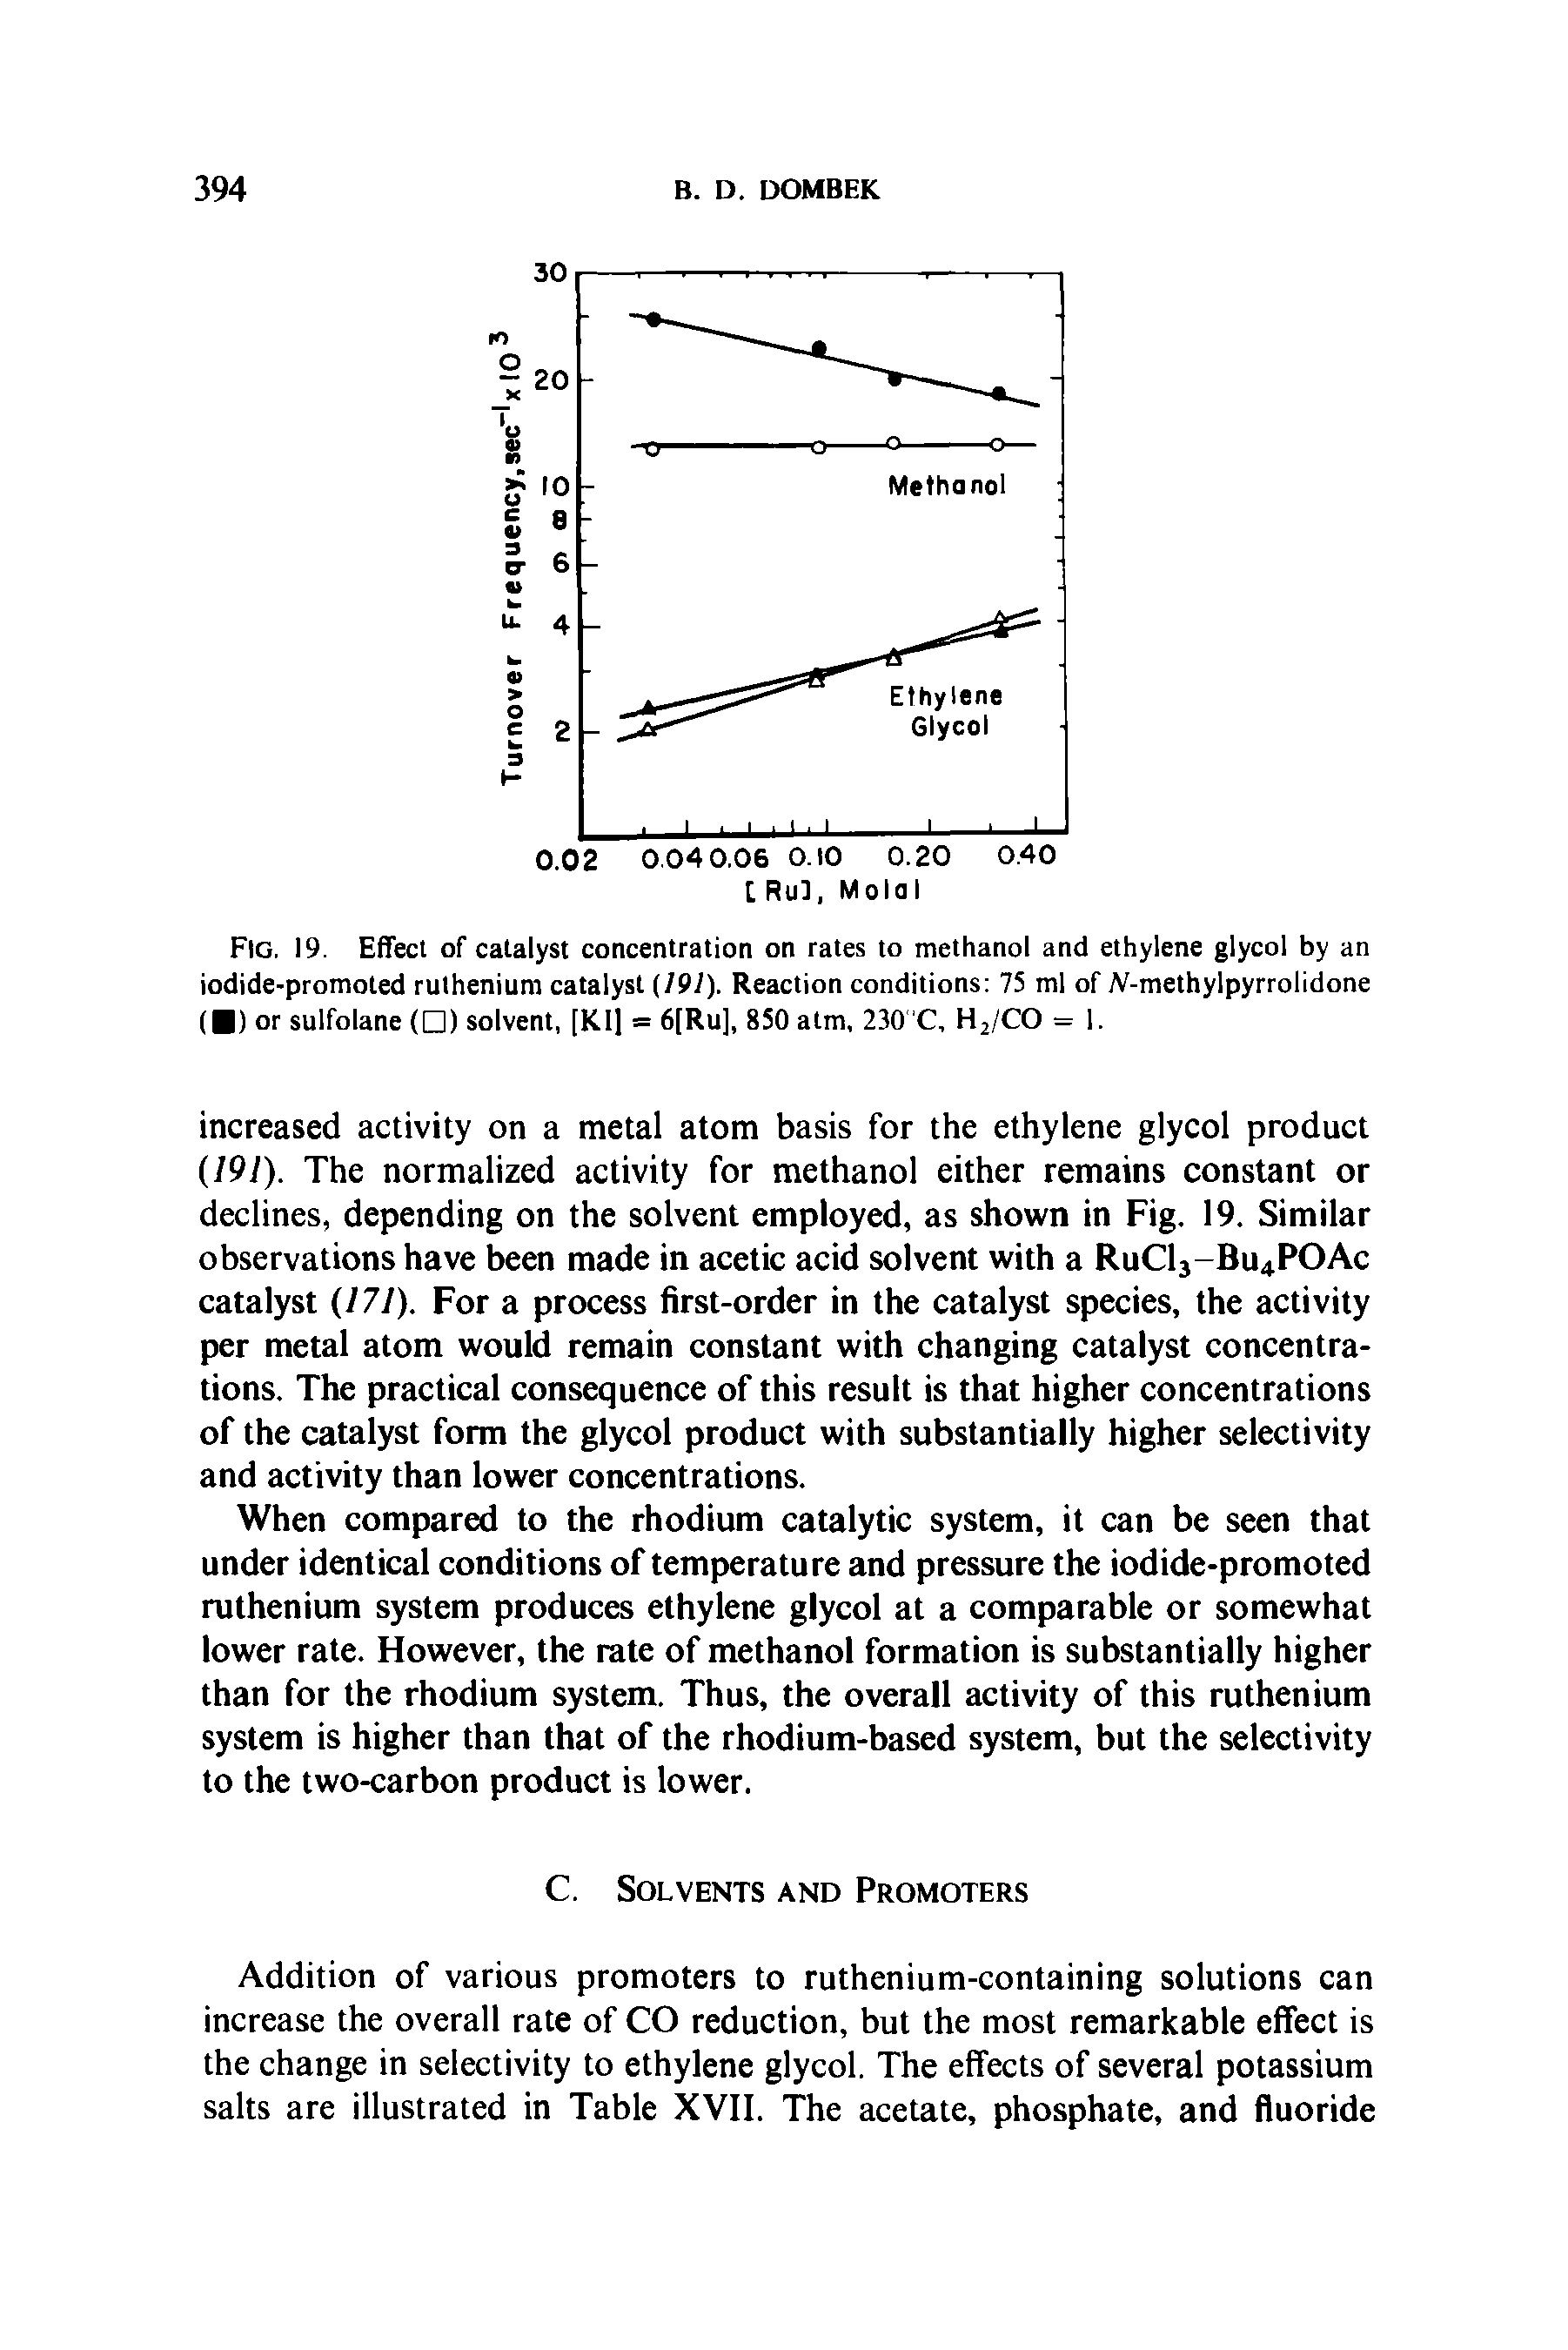 Fig. 19. Effect of catalyst concentration on rates to methanol and ethylene glycol by an iodide-promoted ruthenium catalyst (191). Reaction conditions 75 ml of N-methylpyrrolidone ( ) or sulfolane ( ) solvent, [KI] = 6[Ru], 850 atm, 230"C, H2/CO = 1.